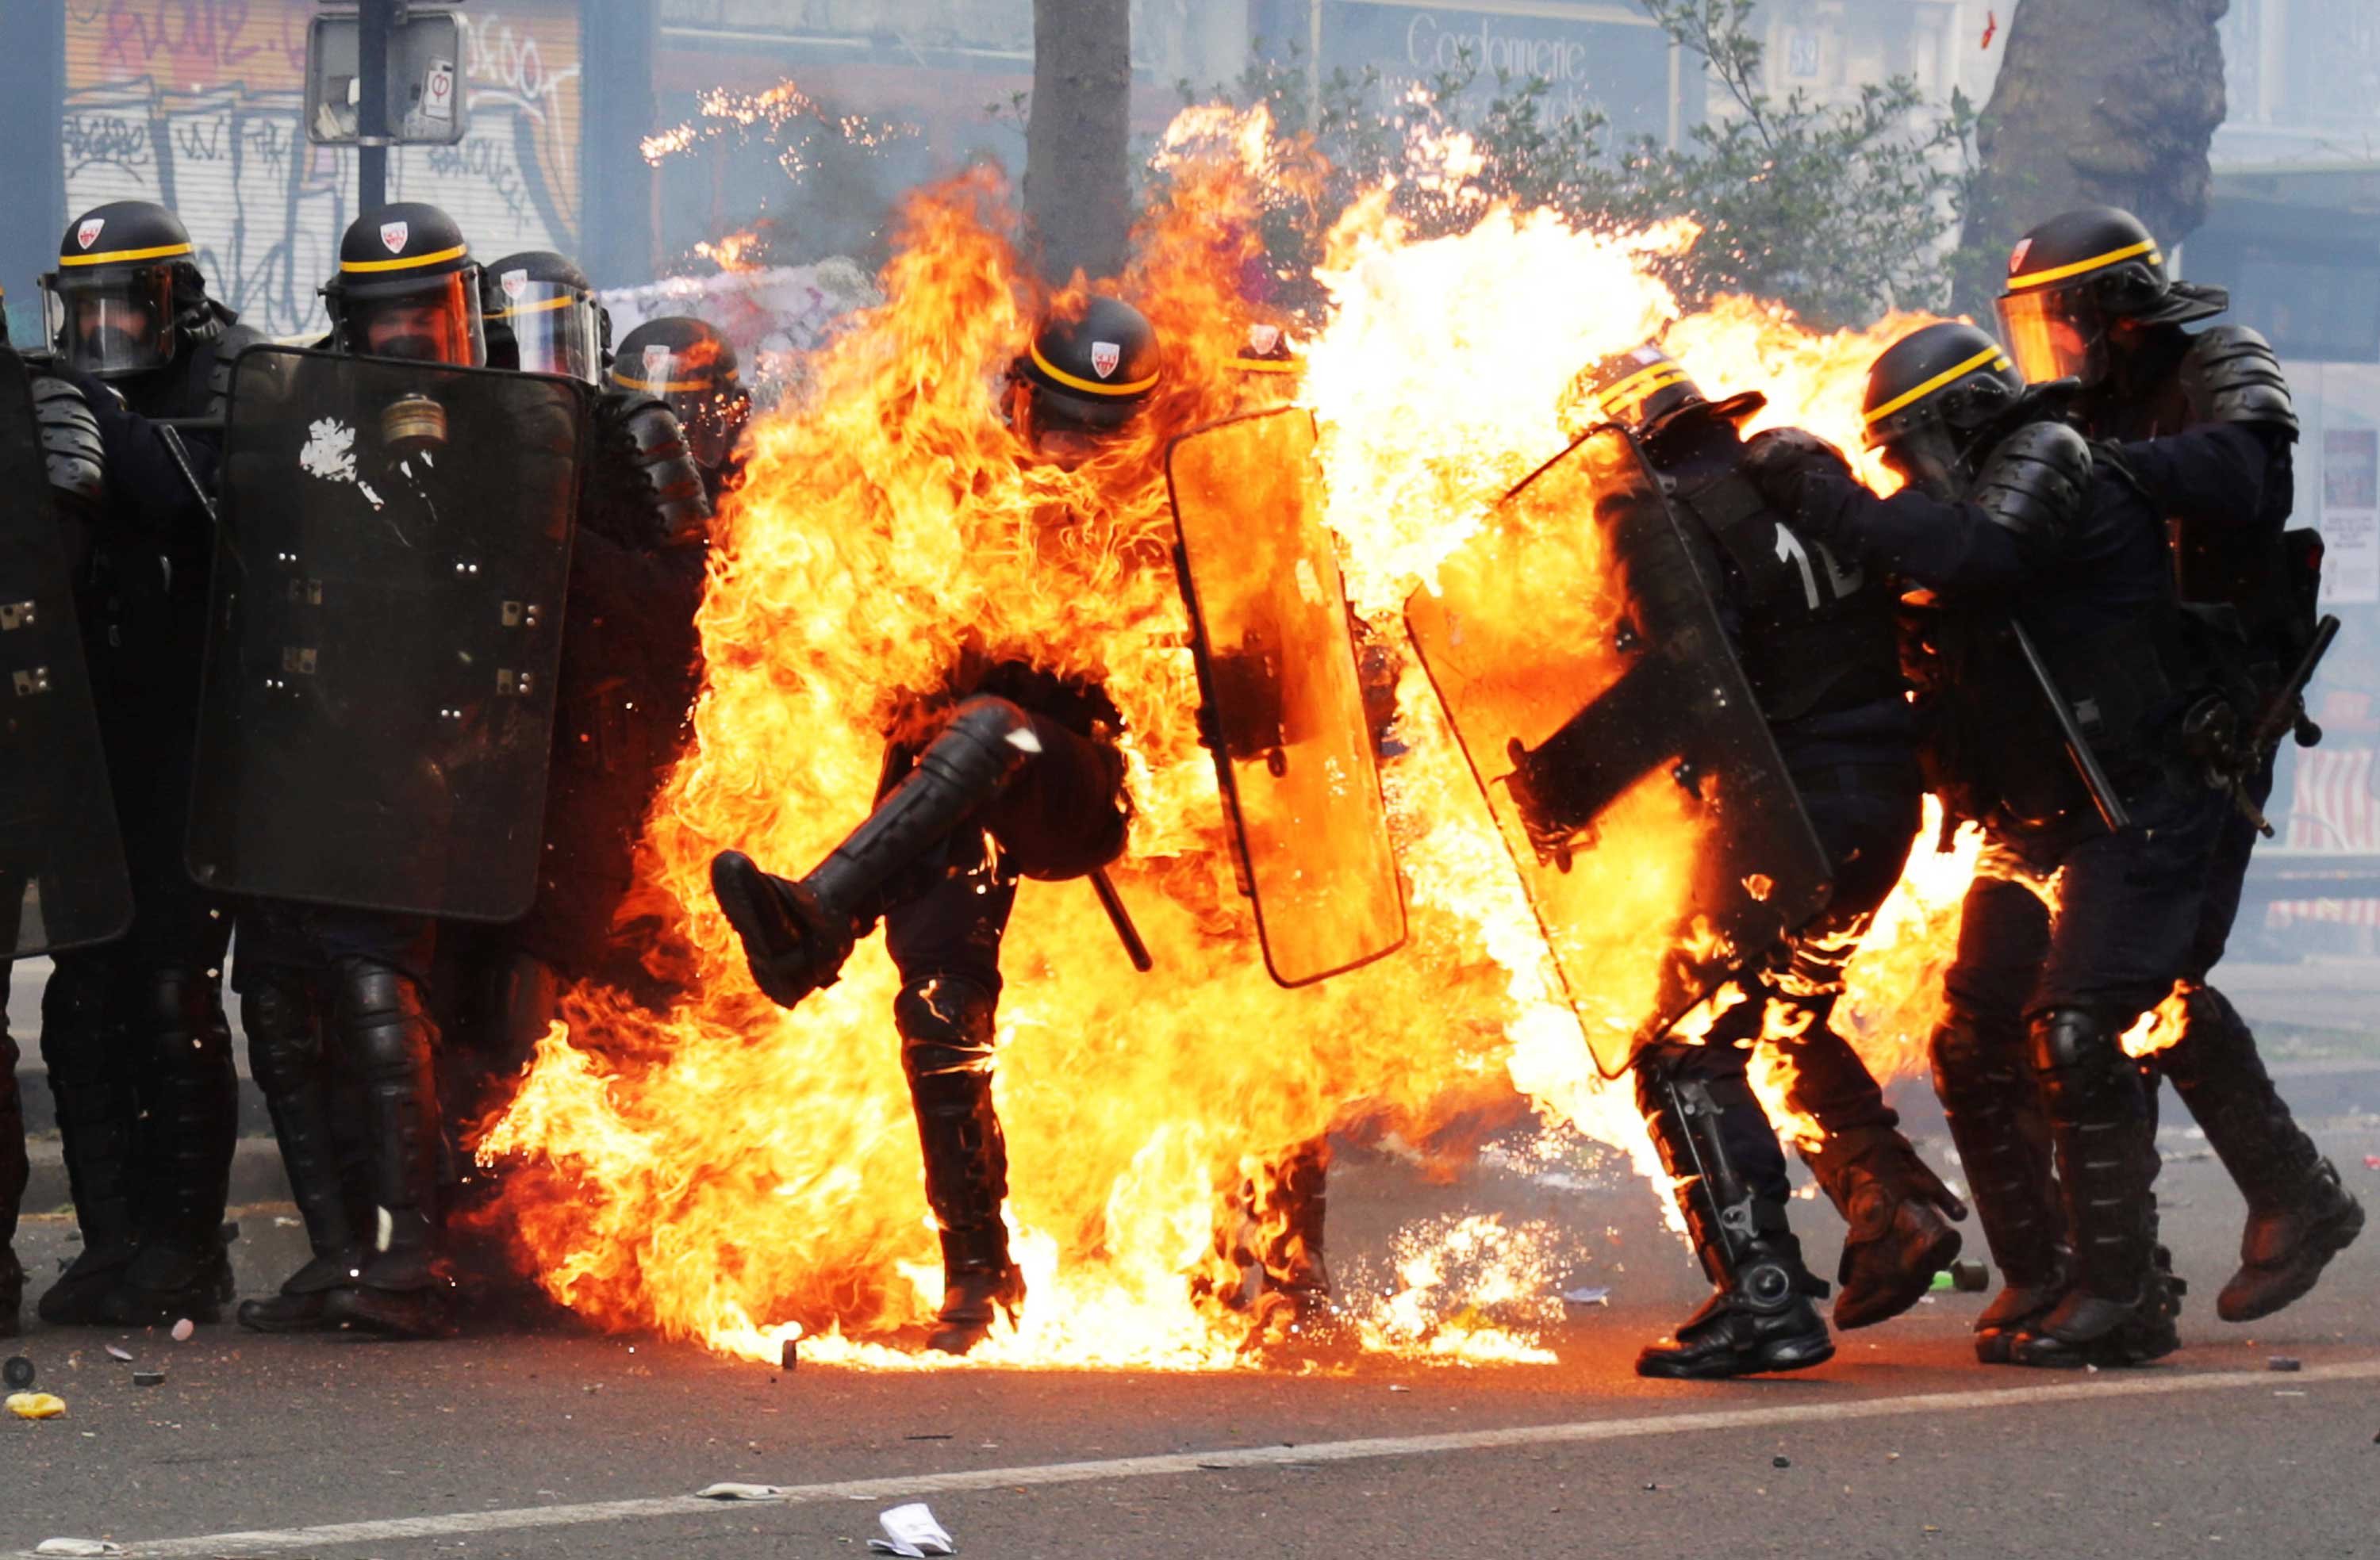 Policeman on Fire: The Story Behind the Viral Photograph | Time